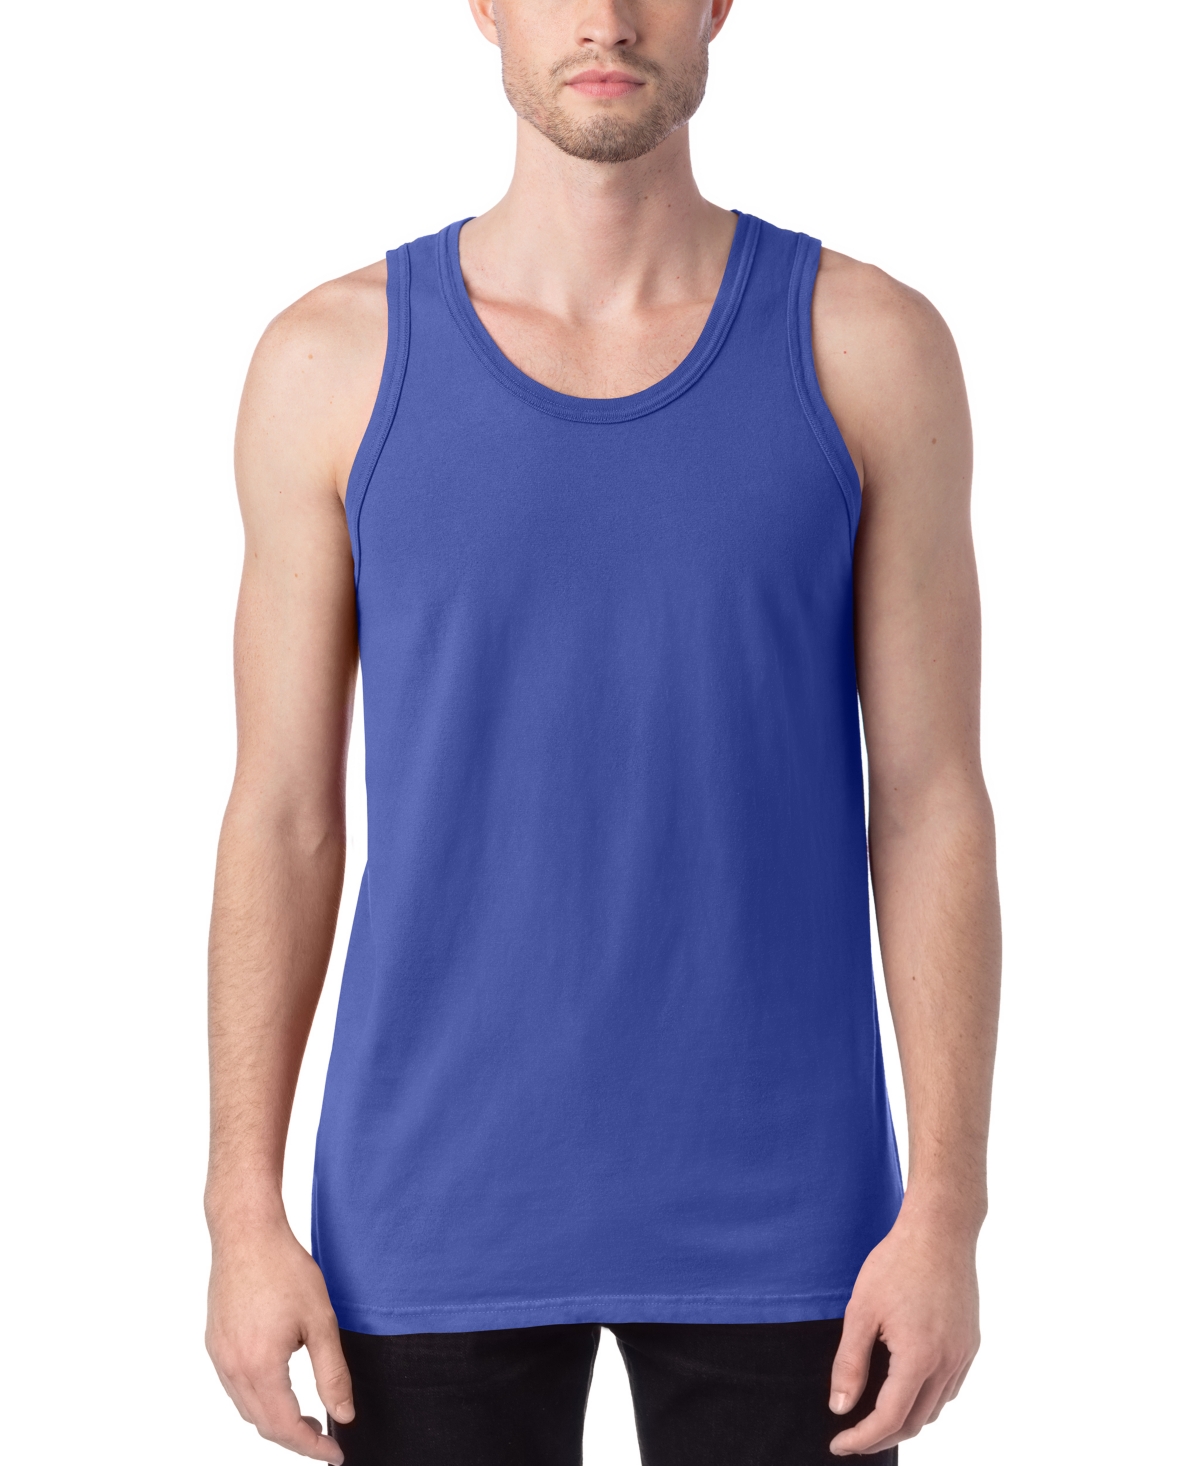 Hanes Unisex Garment Dyed Cotton Tank Top In Blue